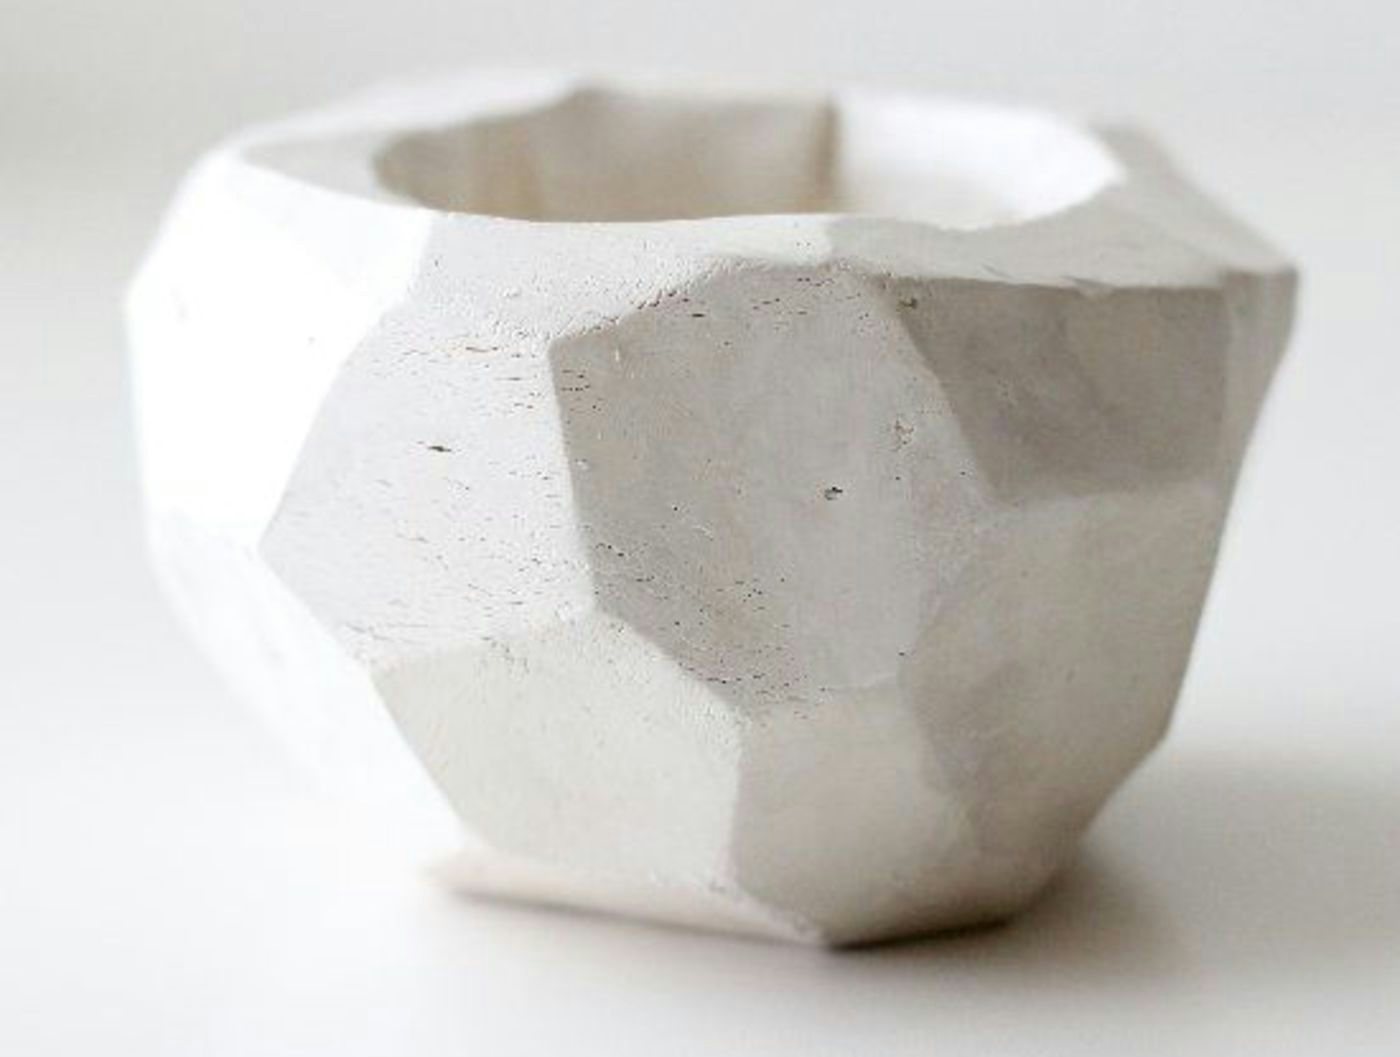 YOUNG ADULT LAB: CERAMIC PLANTERS